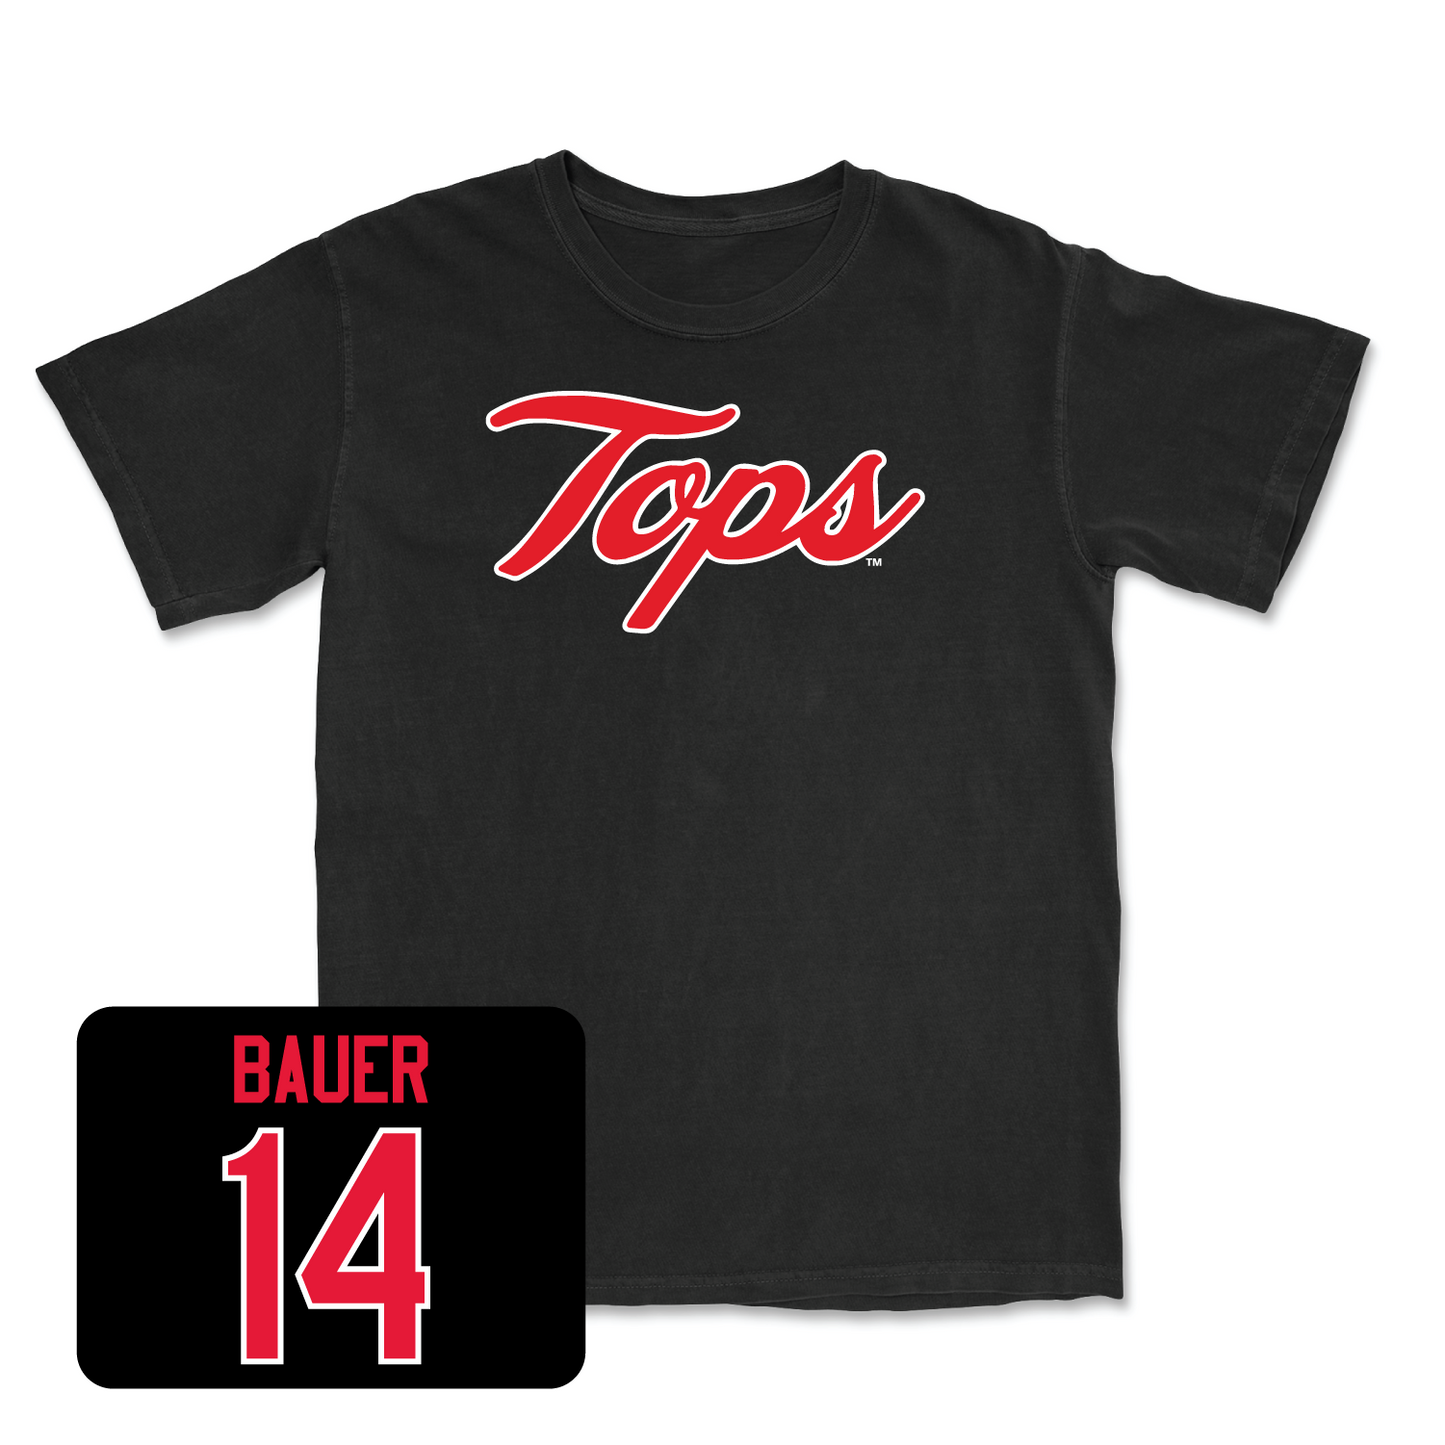 Black Women's Volleyball Tops Tee X-Large / Callie Bauer | #14